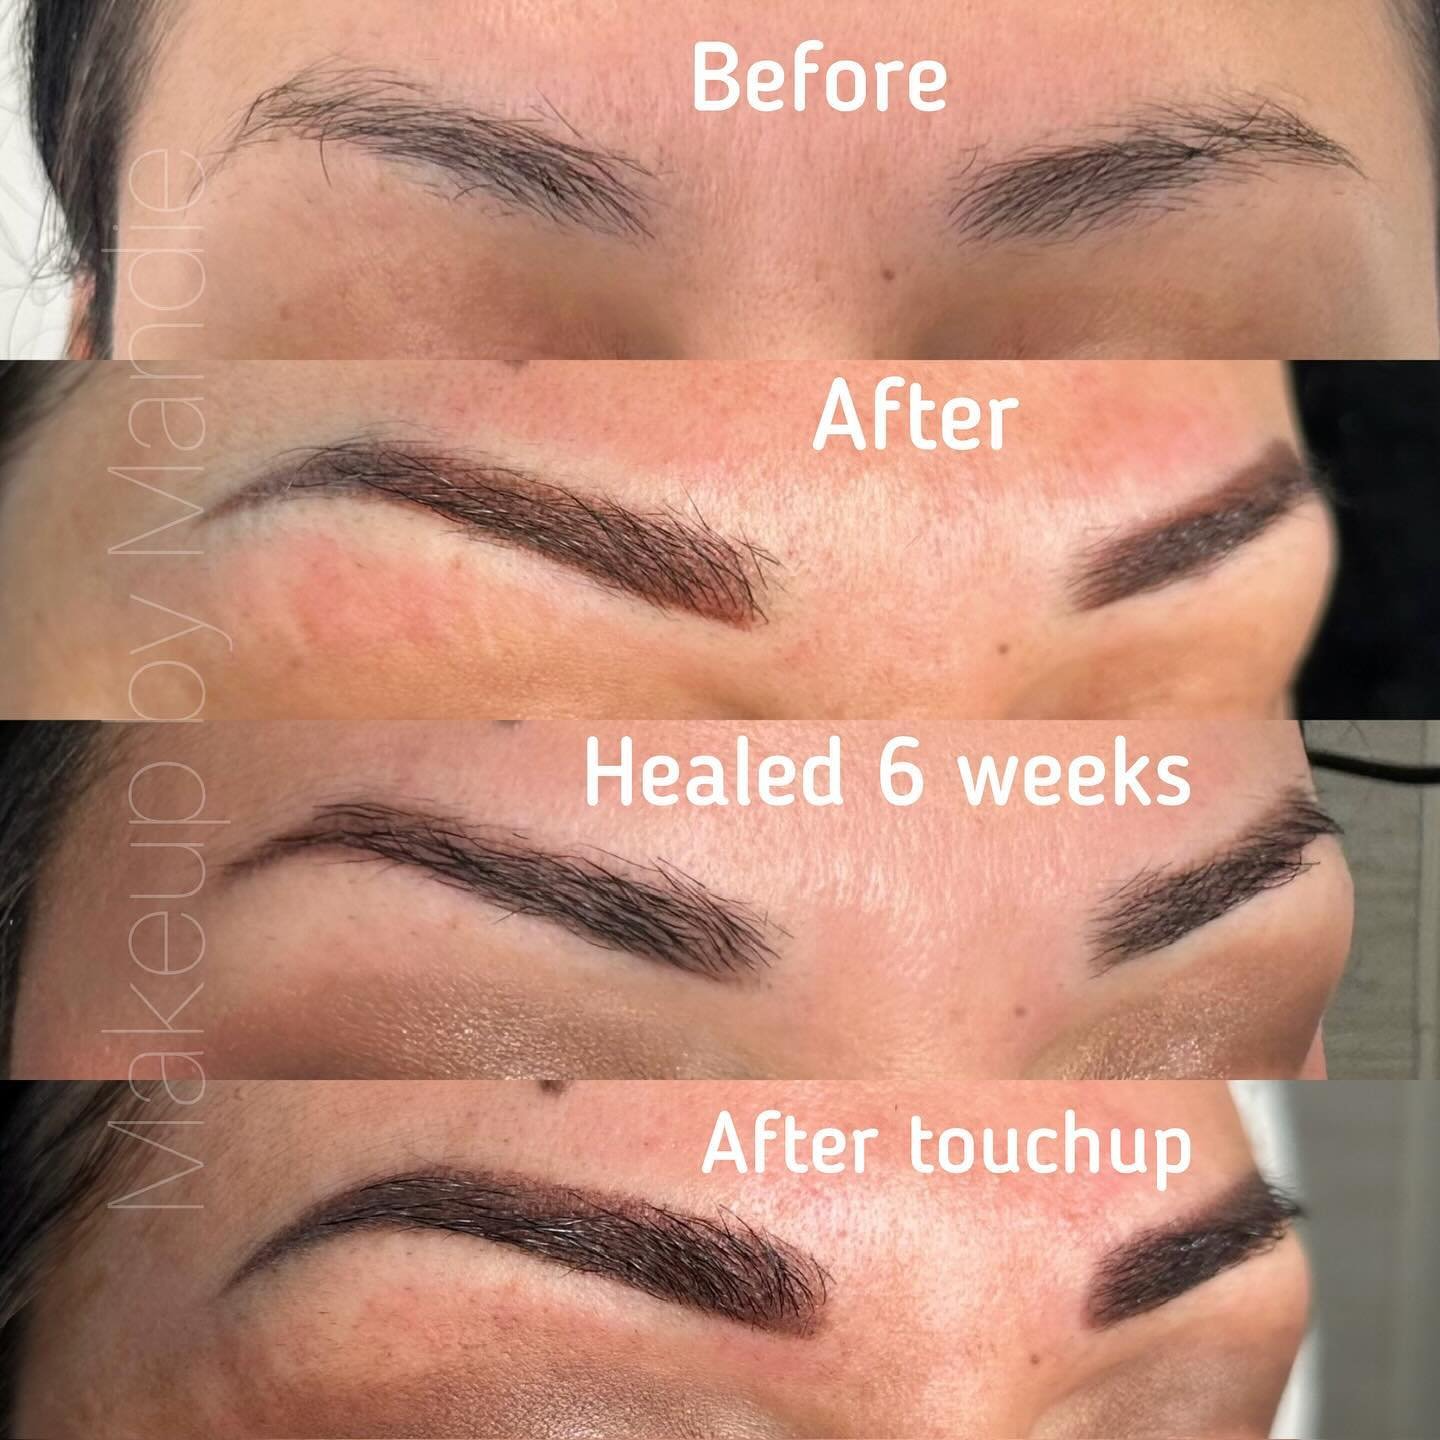 🩵🩵 Is it time for you to finally take the plunge for new brows, lips, or eyeliner? Have you been scared to death because you see scary pics on the internet? I pride myself in doing natural work that works for every kind of client, AND every client 